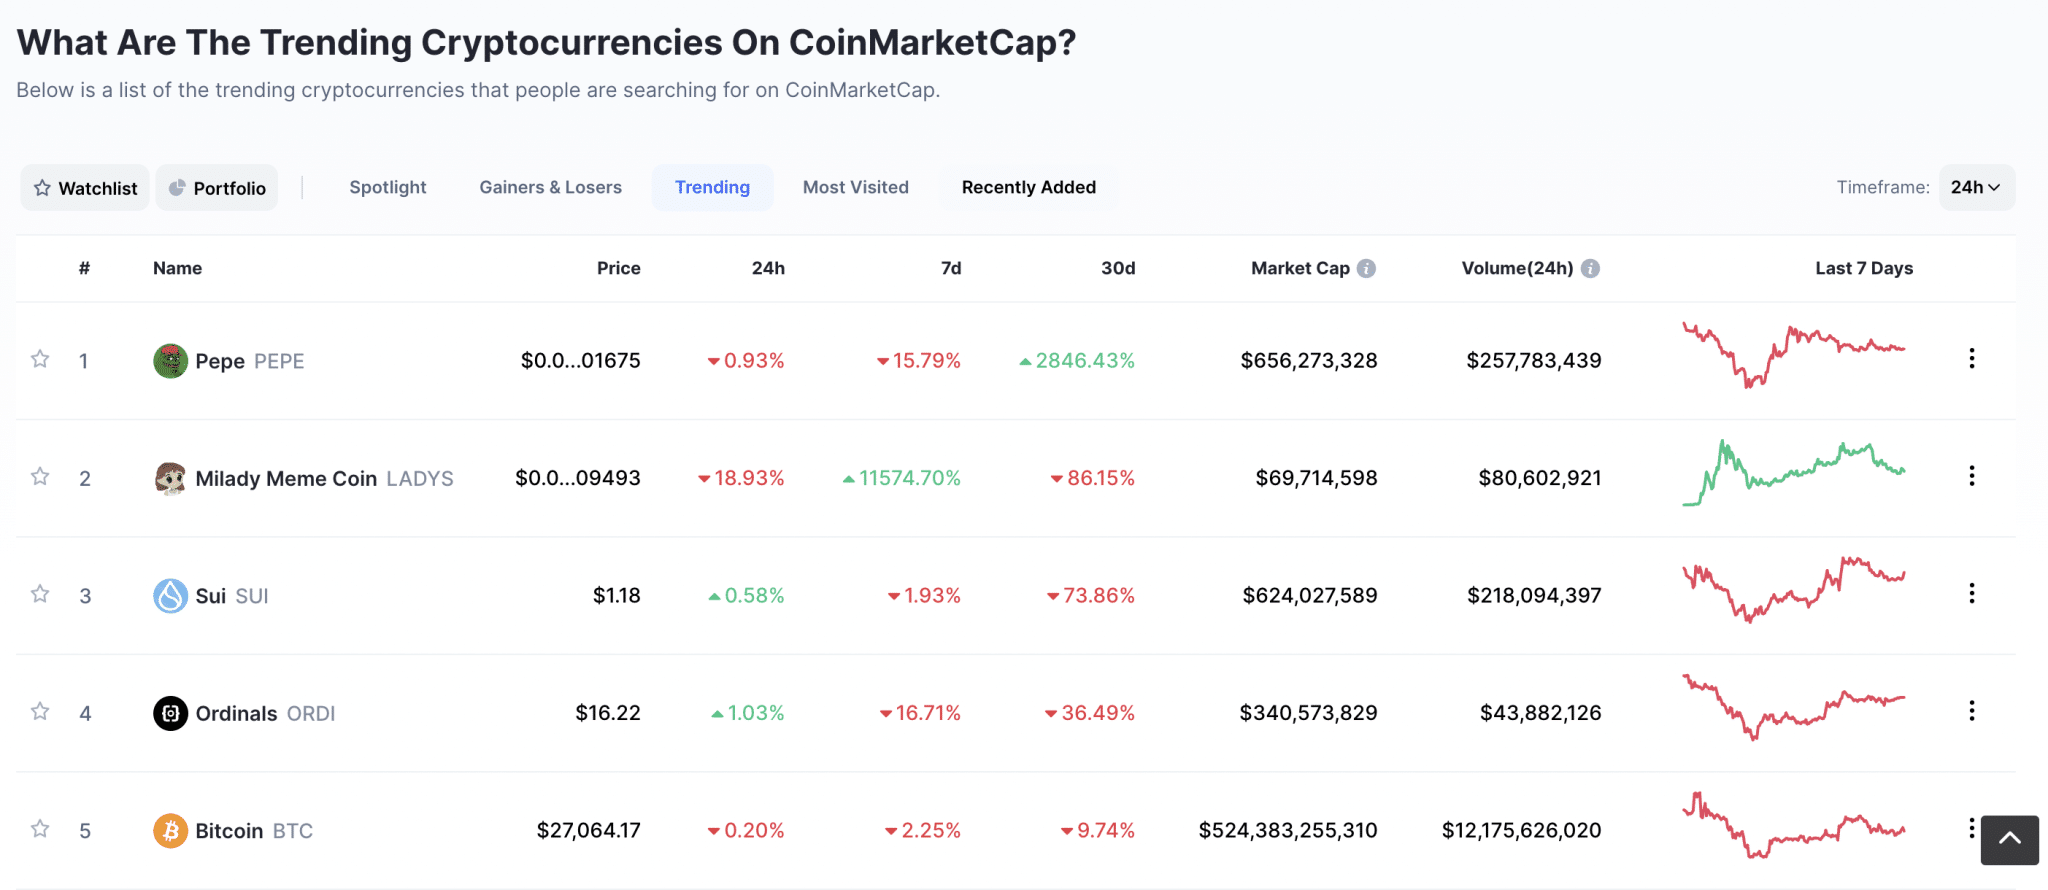 What Are The Trending Cryptocurrencies On CoinMarketCap?